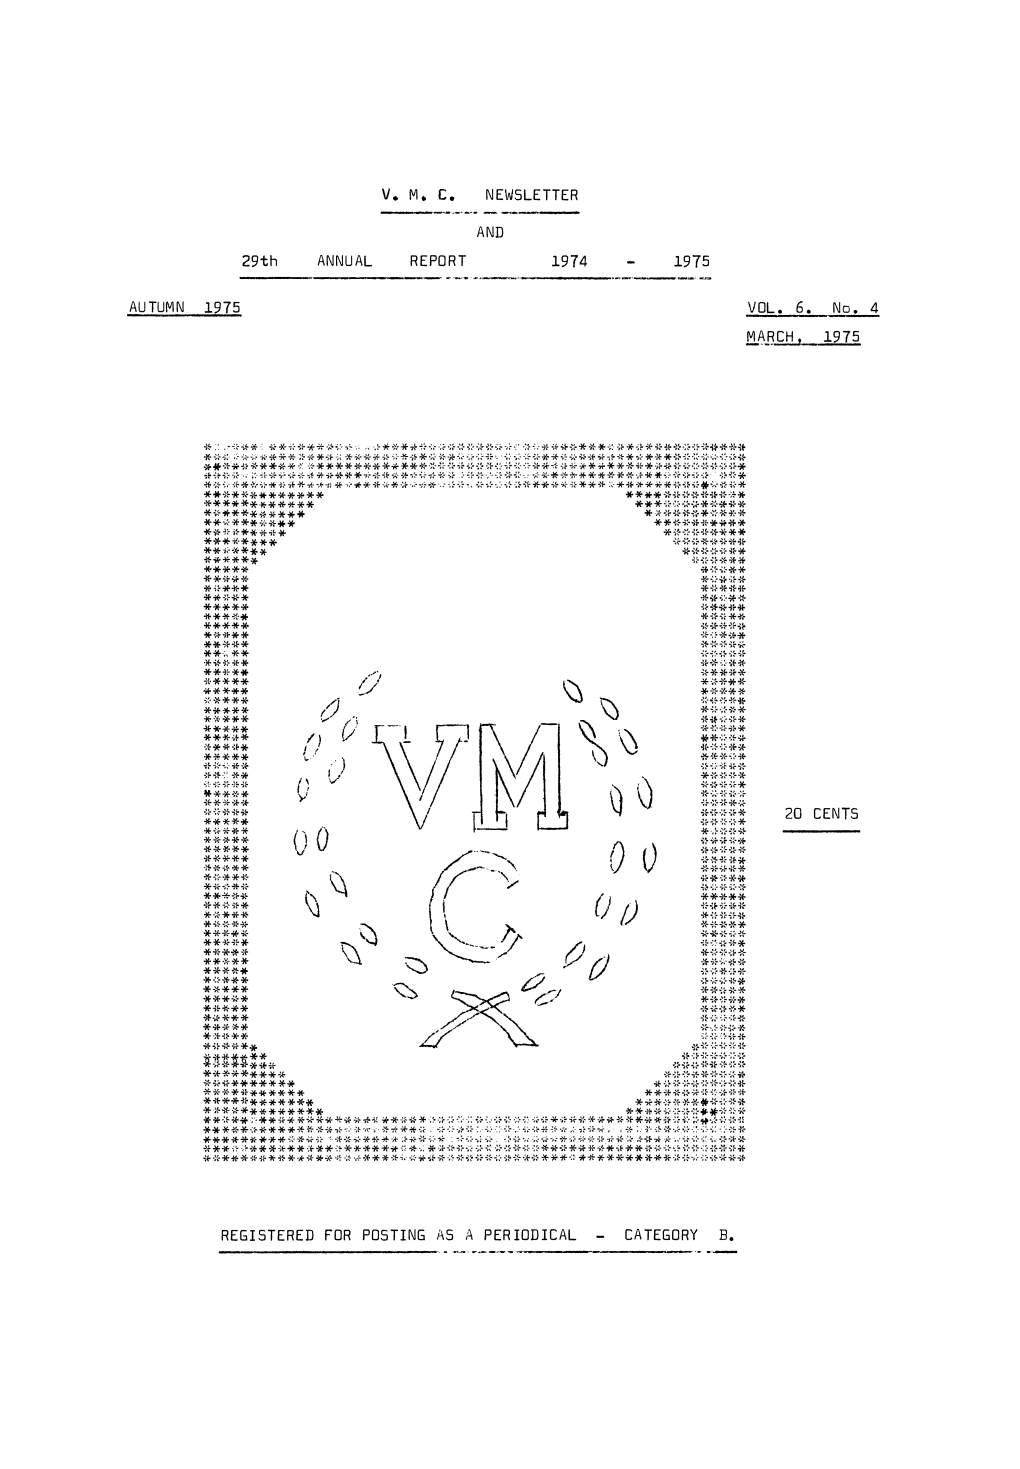 VICTORIAN MARATHON CLUB NEWSLETTER 15 PUBLISHED for the INFORMATION of MEMBERS of the VMC &, OTHER PEOPLE INTERESTED in DISTANCE RUNNING and ATHLETICS in Gl'm-F.Ni